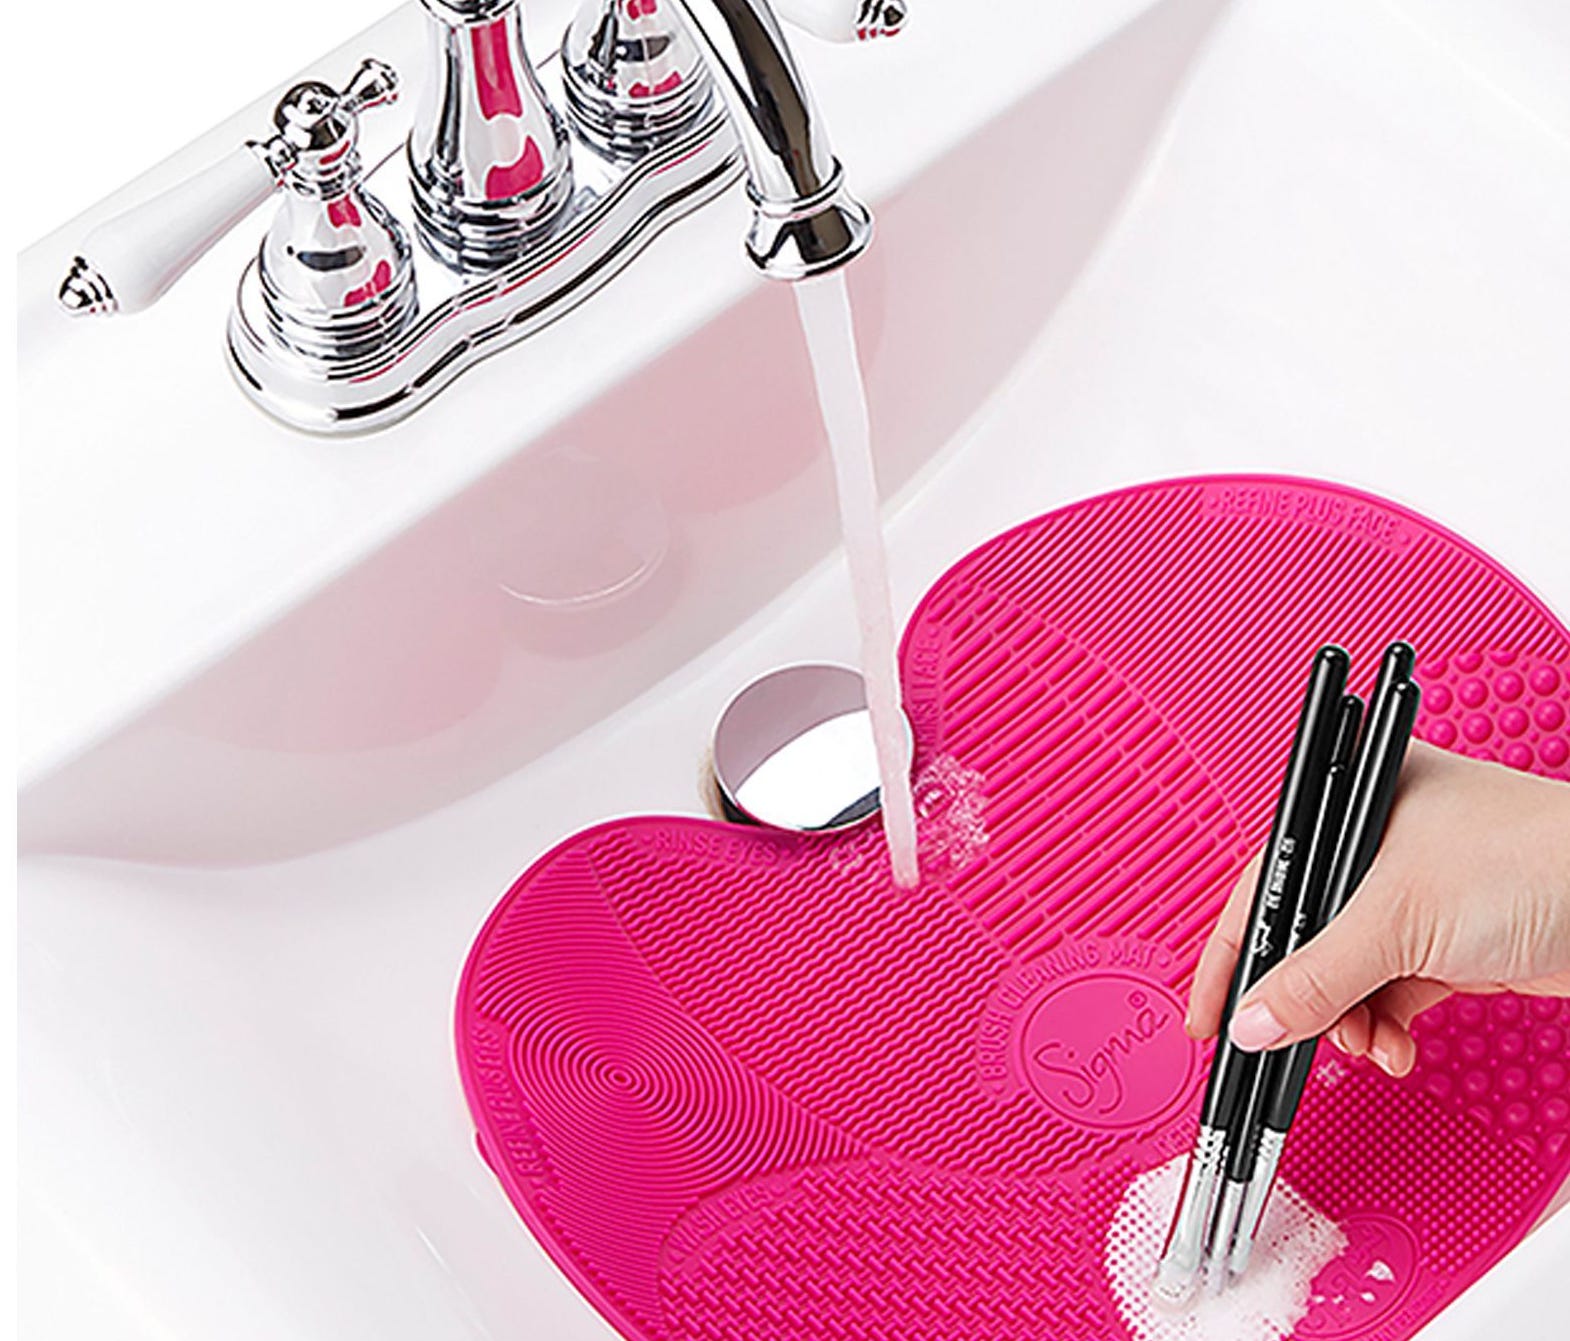 Your makeup brushes are loaded with deadly bacteria—Here's how to wash them